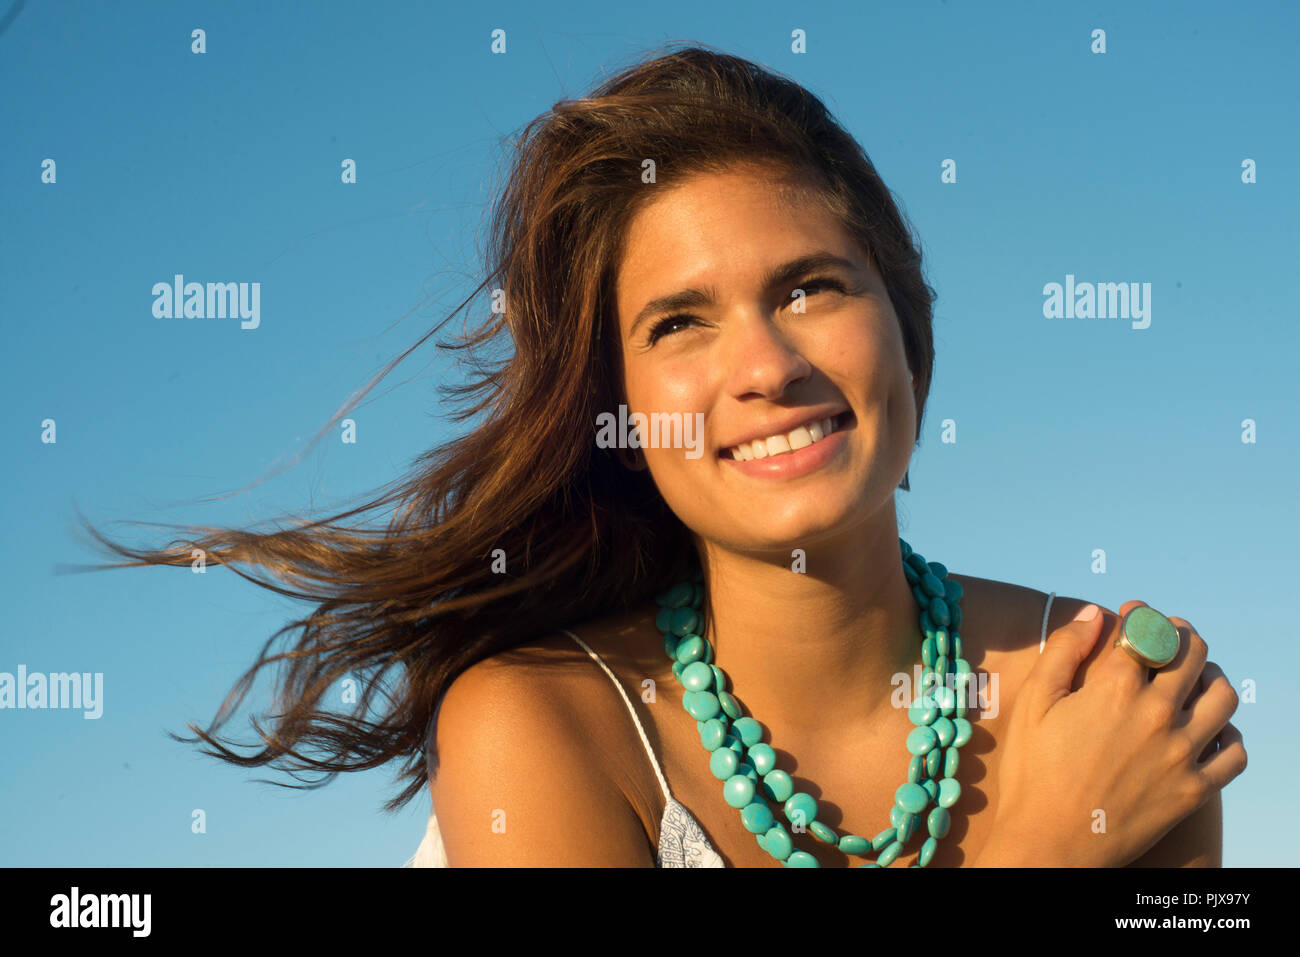 Young woman wearing with long brown flyaway hair against blue sky Stock Photo